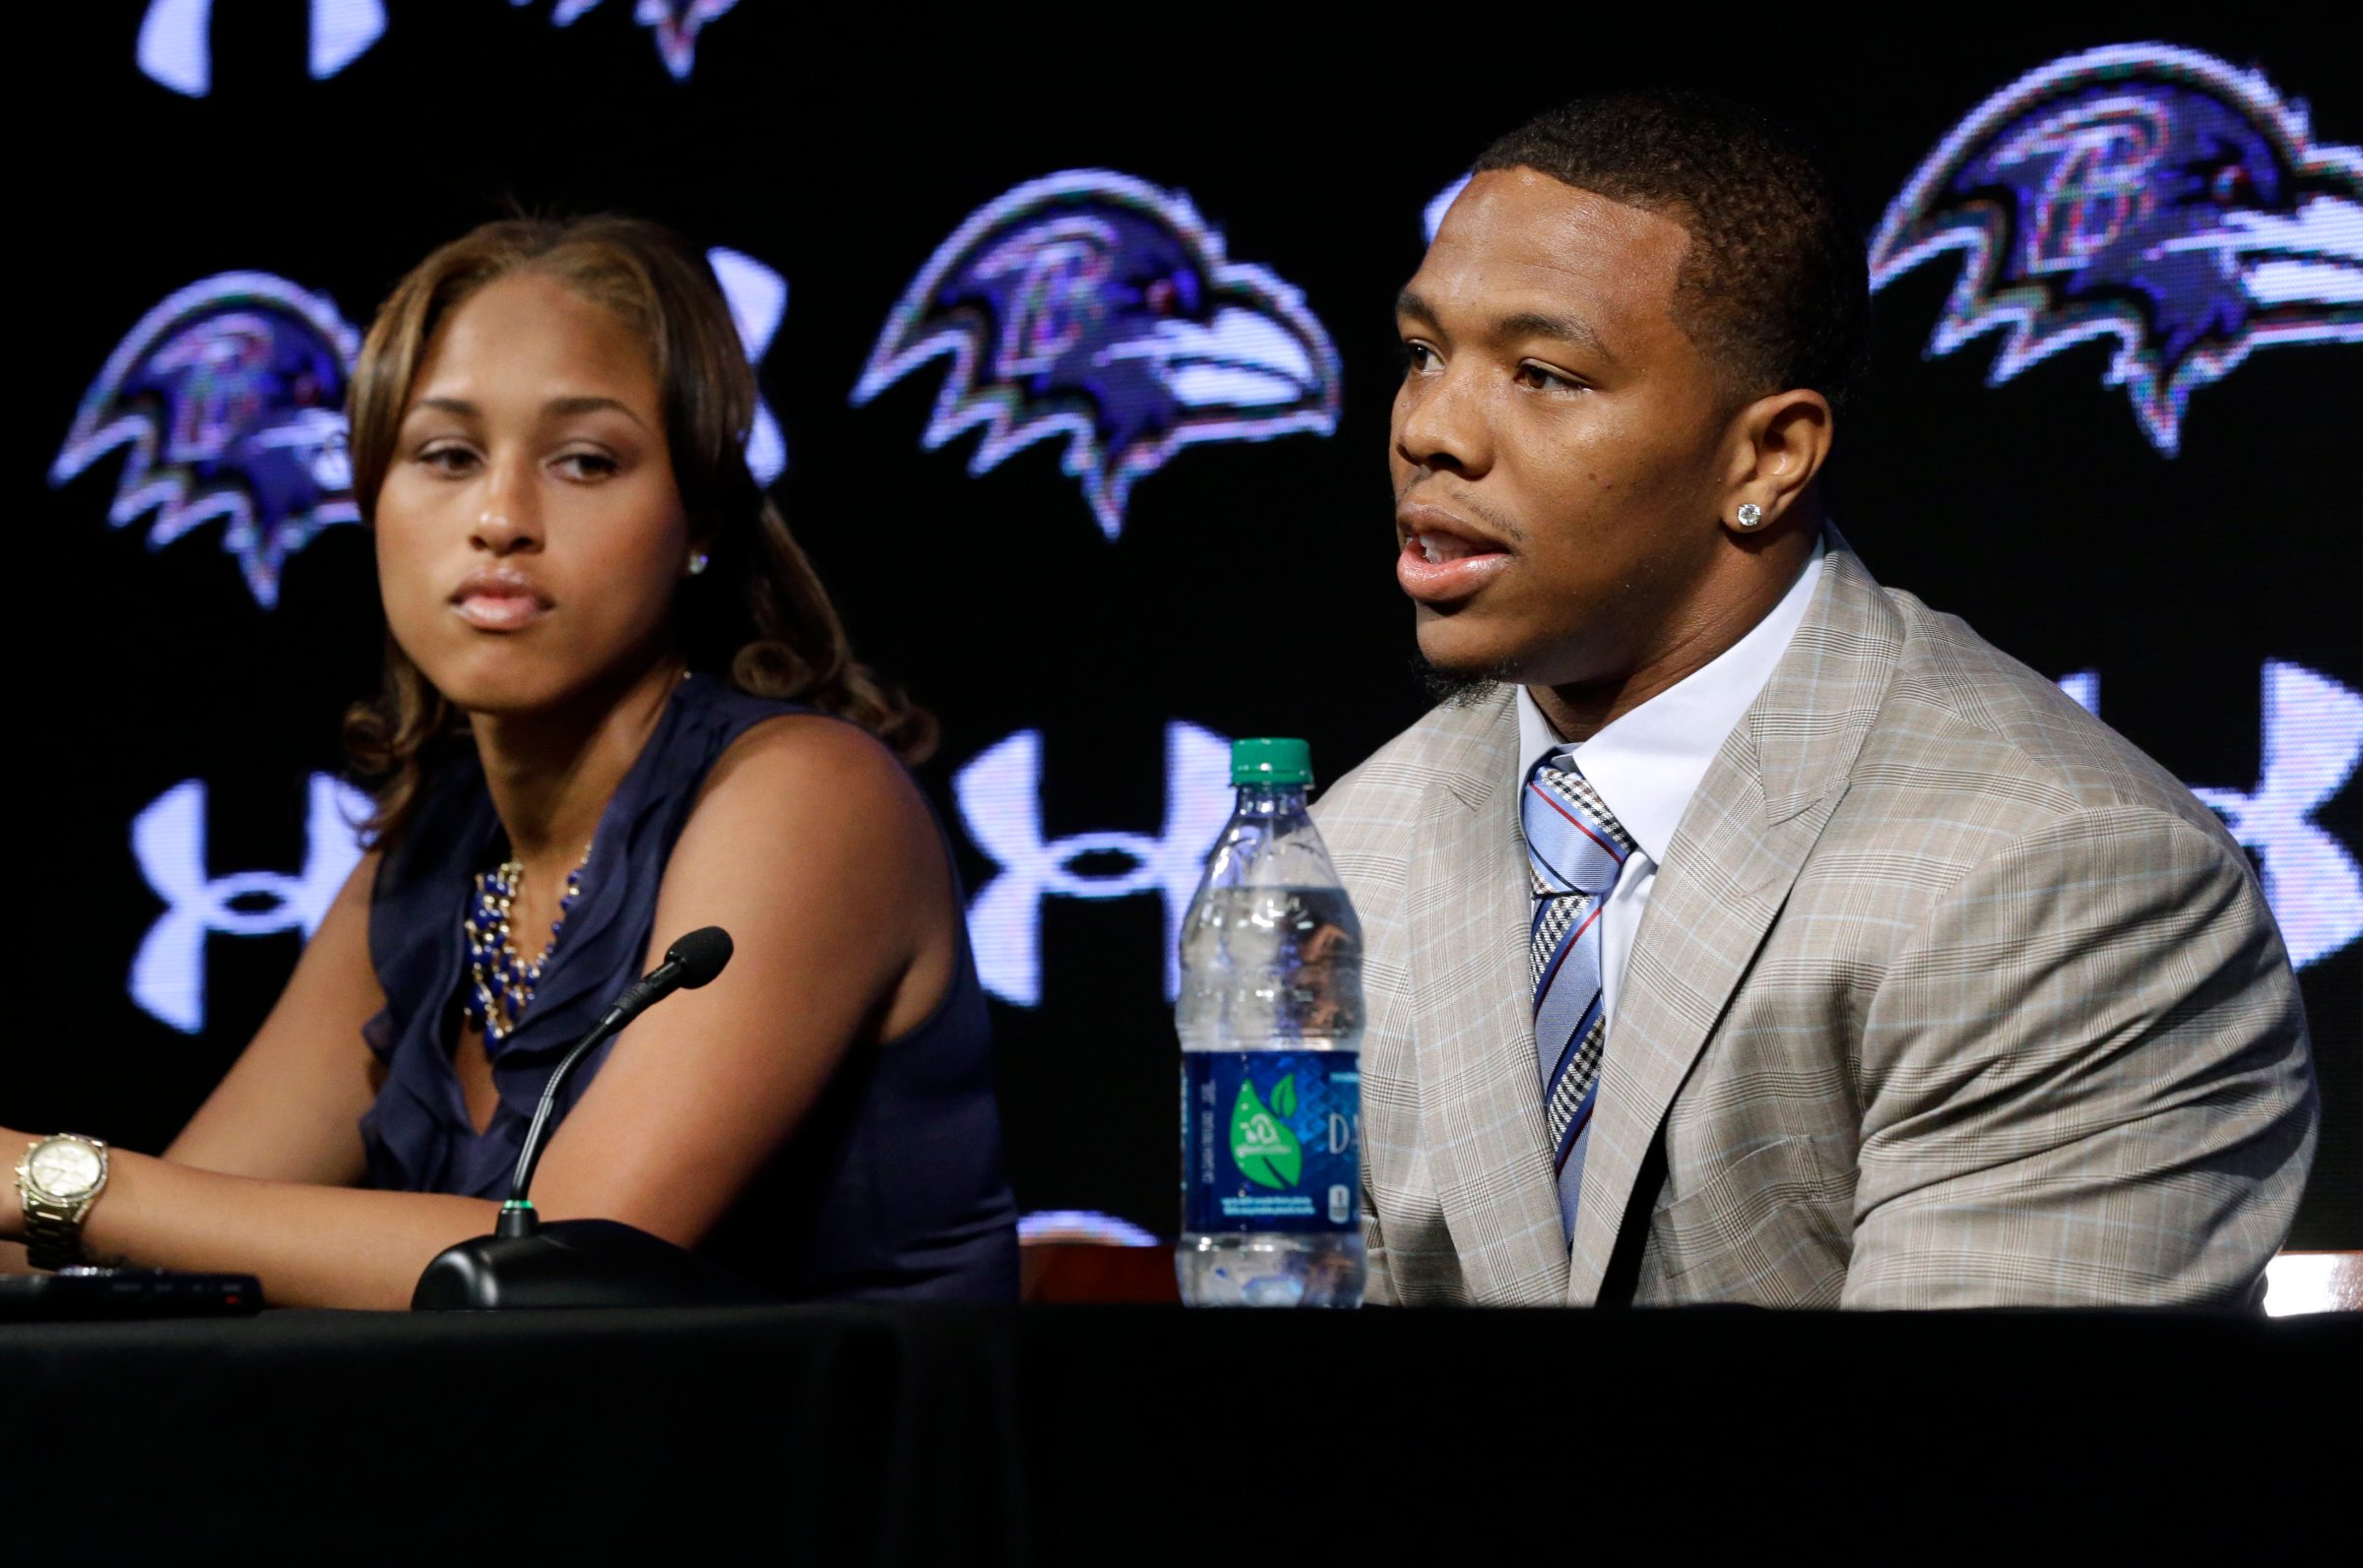 Baltimore Ravens running back Ray Rice speaks alongside his wife Janay during a news conference at the team's practice facility in Owings Mills, Md on May 23, 2014.